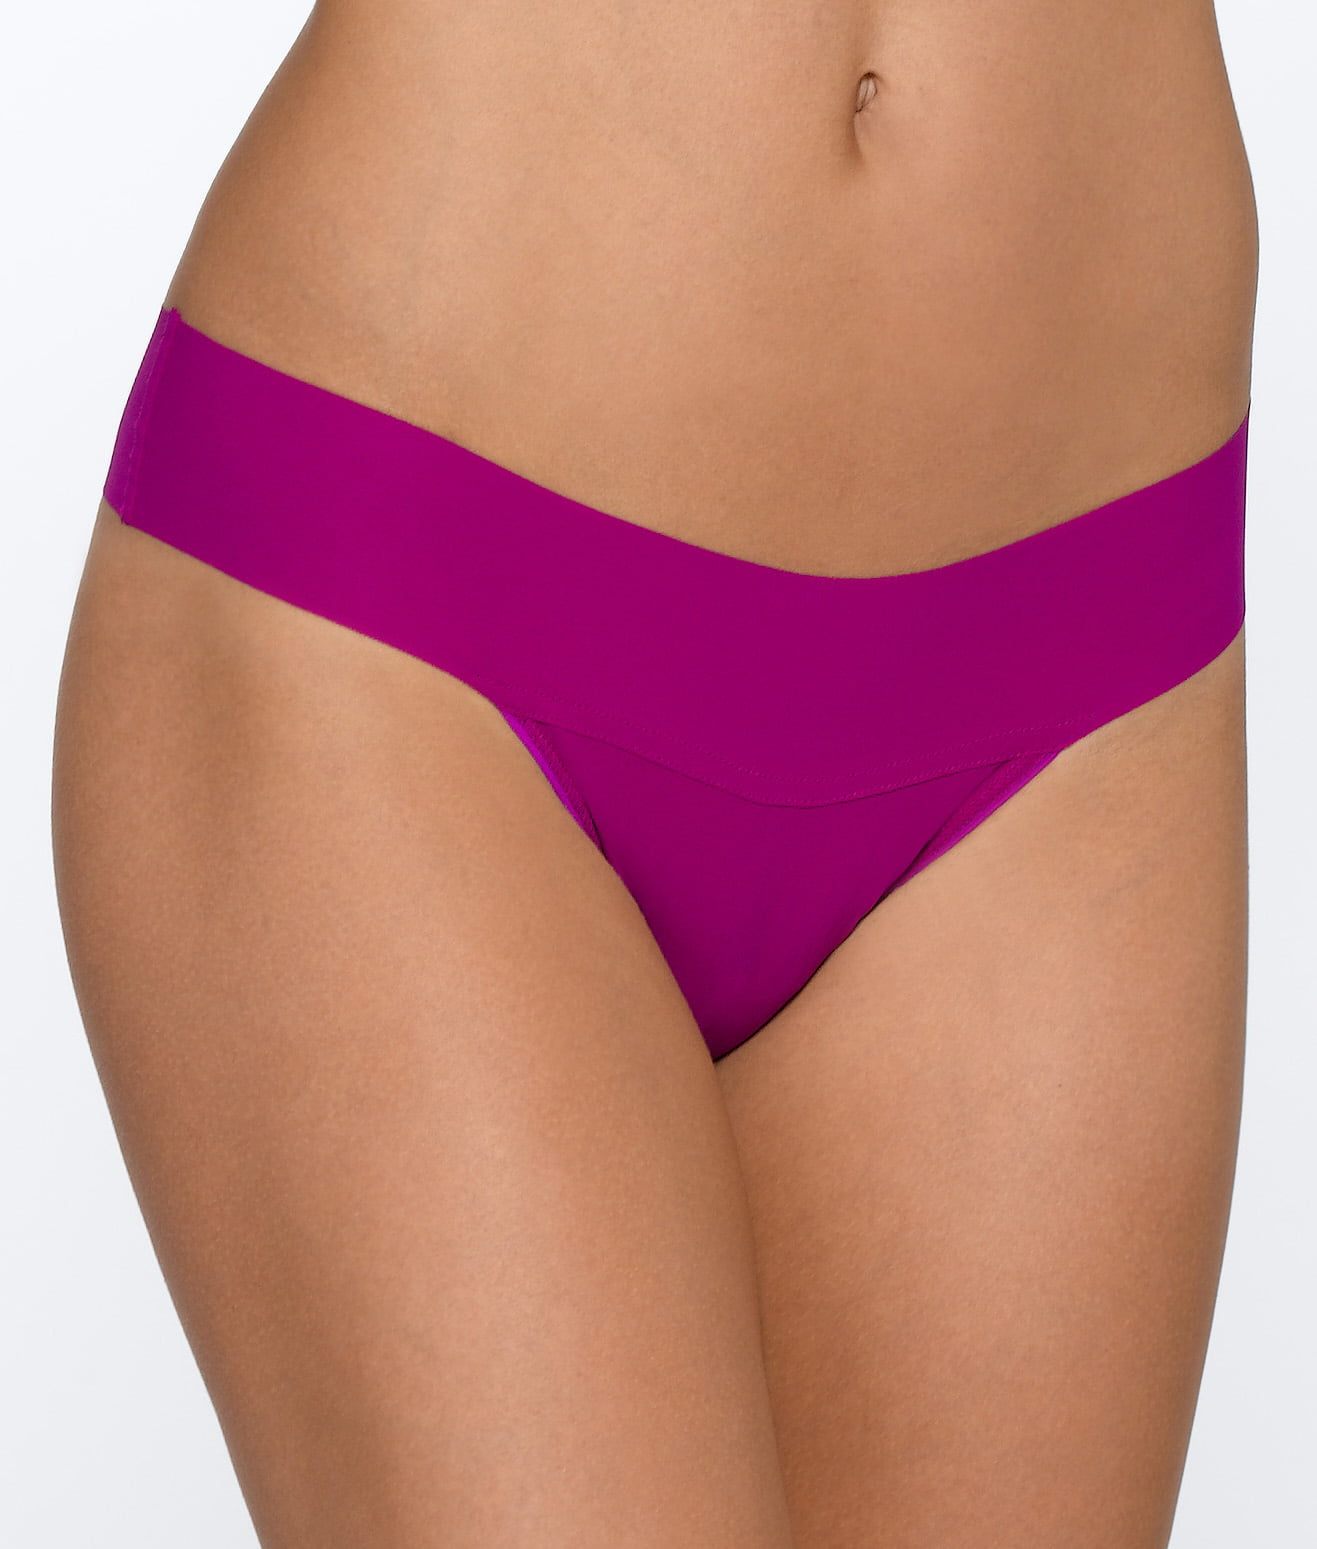 HANKY PANKY Bare Eve Natural Rise Thong in Wisteria 6J1661P 